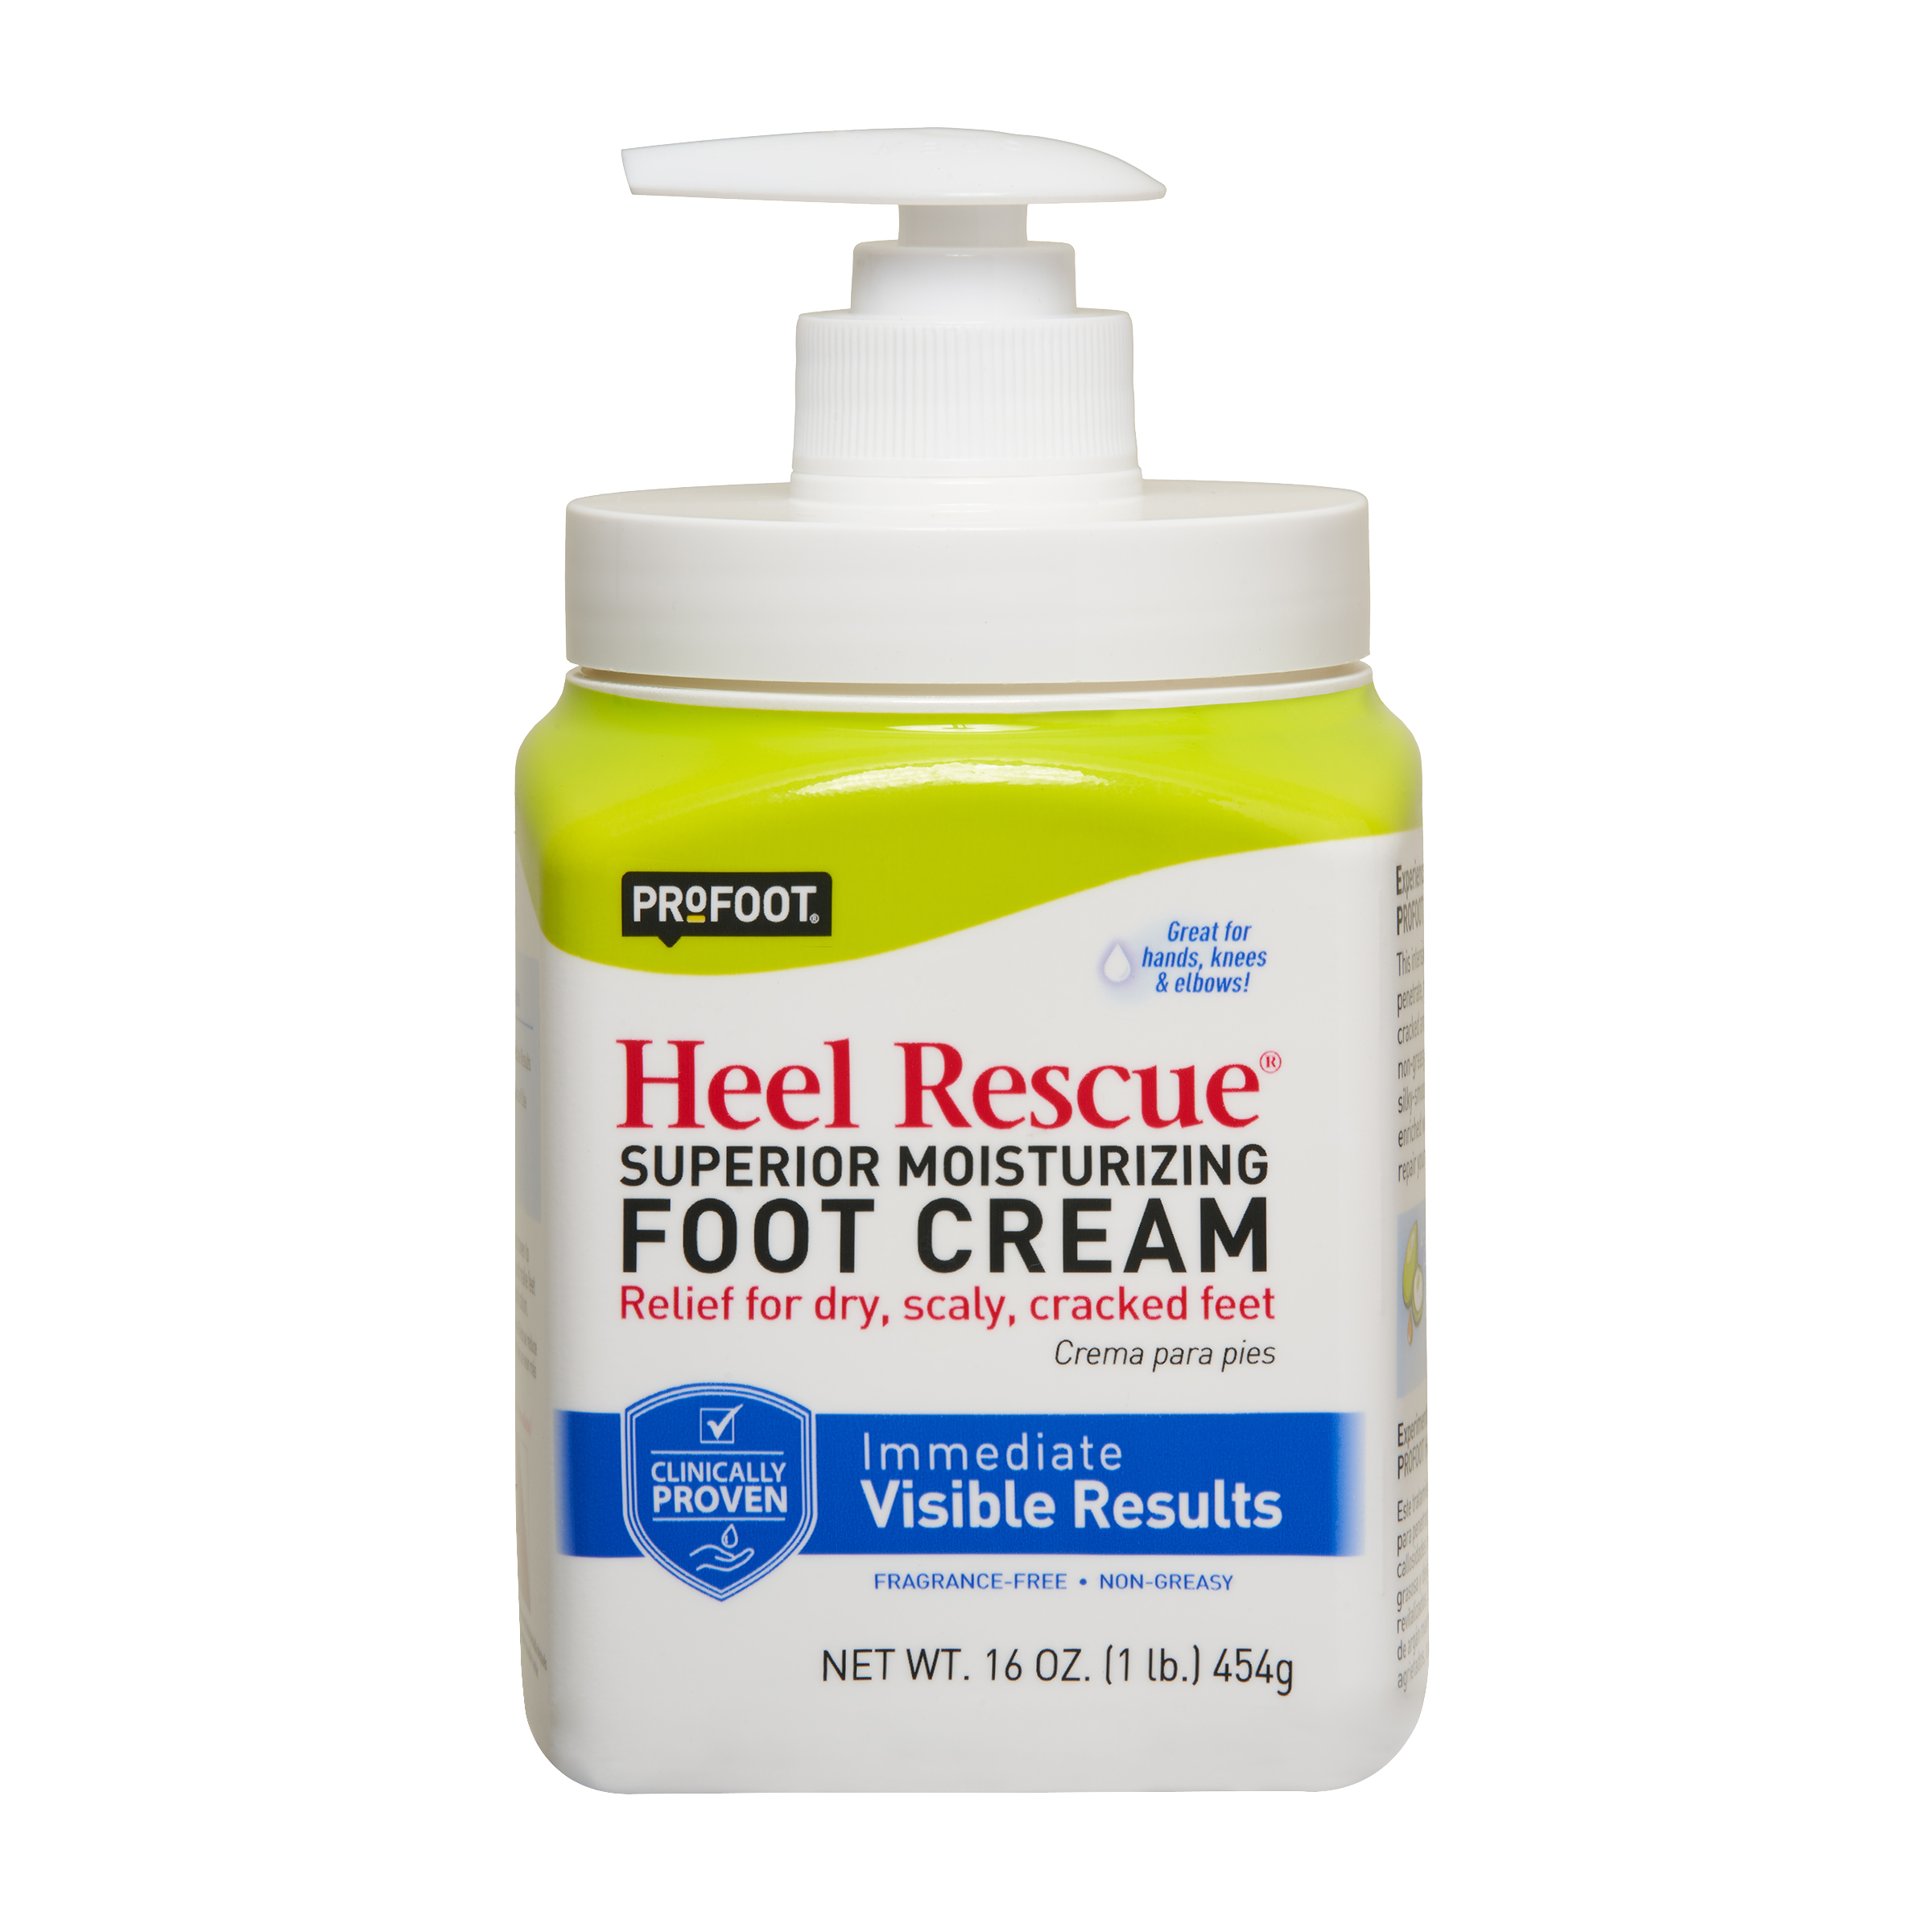 PROFOOT Heel Rescue Foot Cream for Cracked, Calloused, or Chapped Skin, 16 oz - image 1 of 8